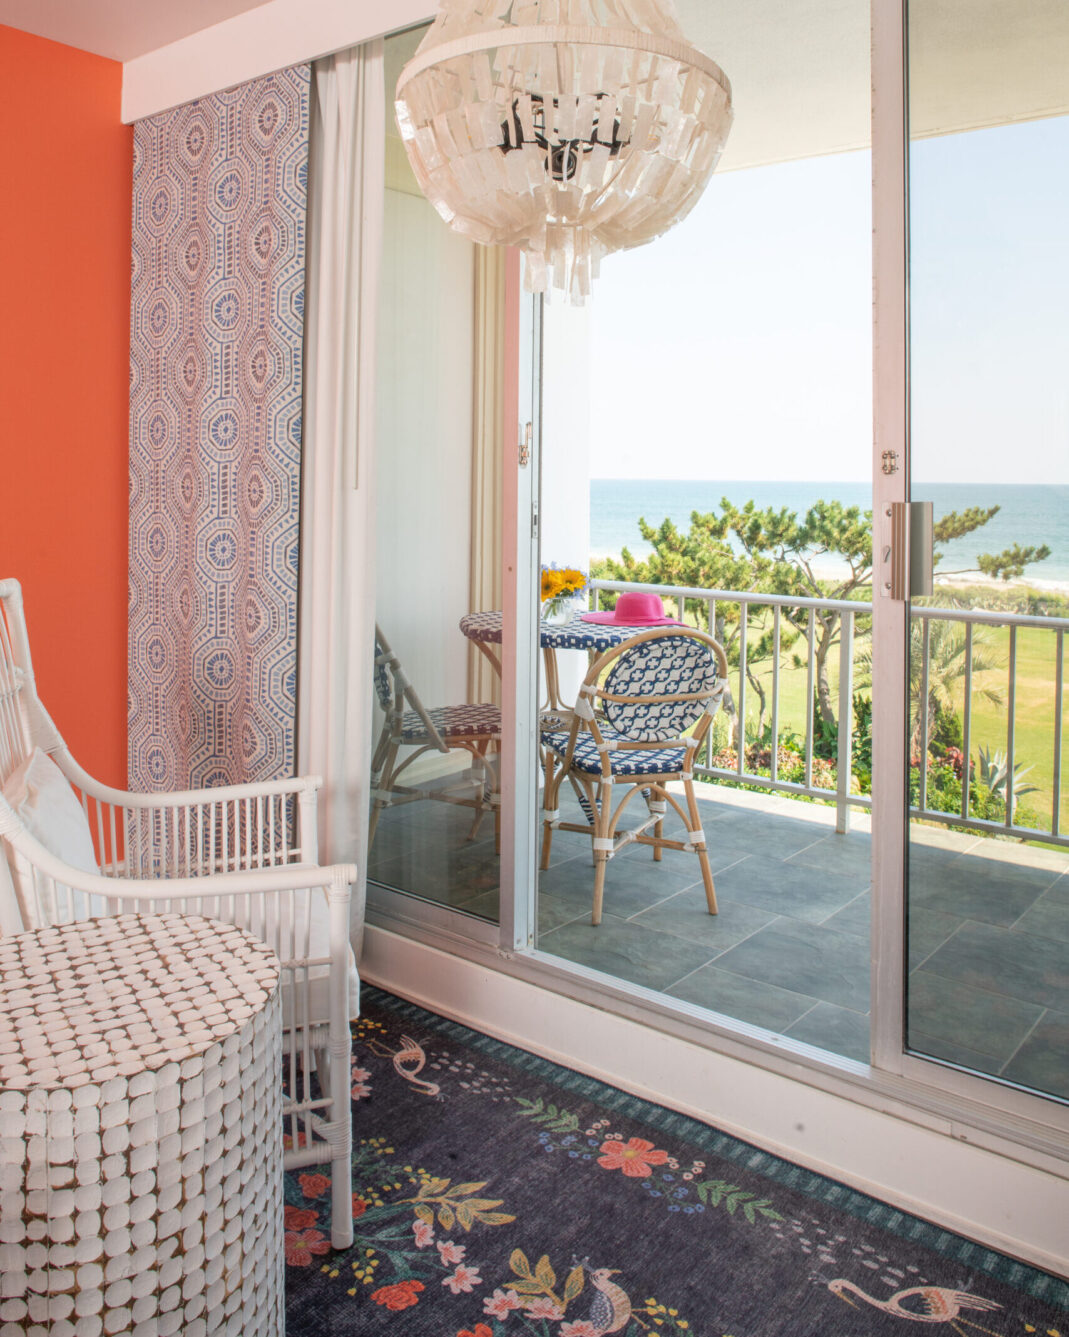 Hanging light fixture and outdoor balcony with an oceanfront view at Blockade Runner.